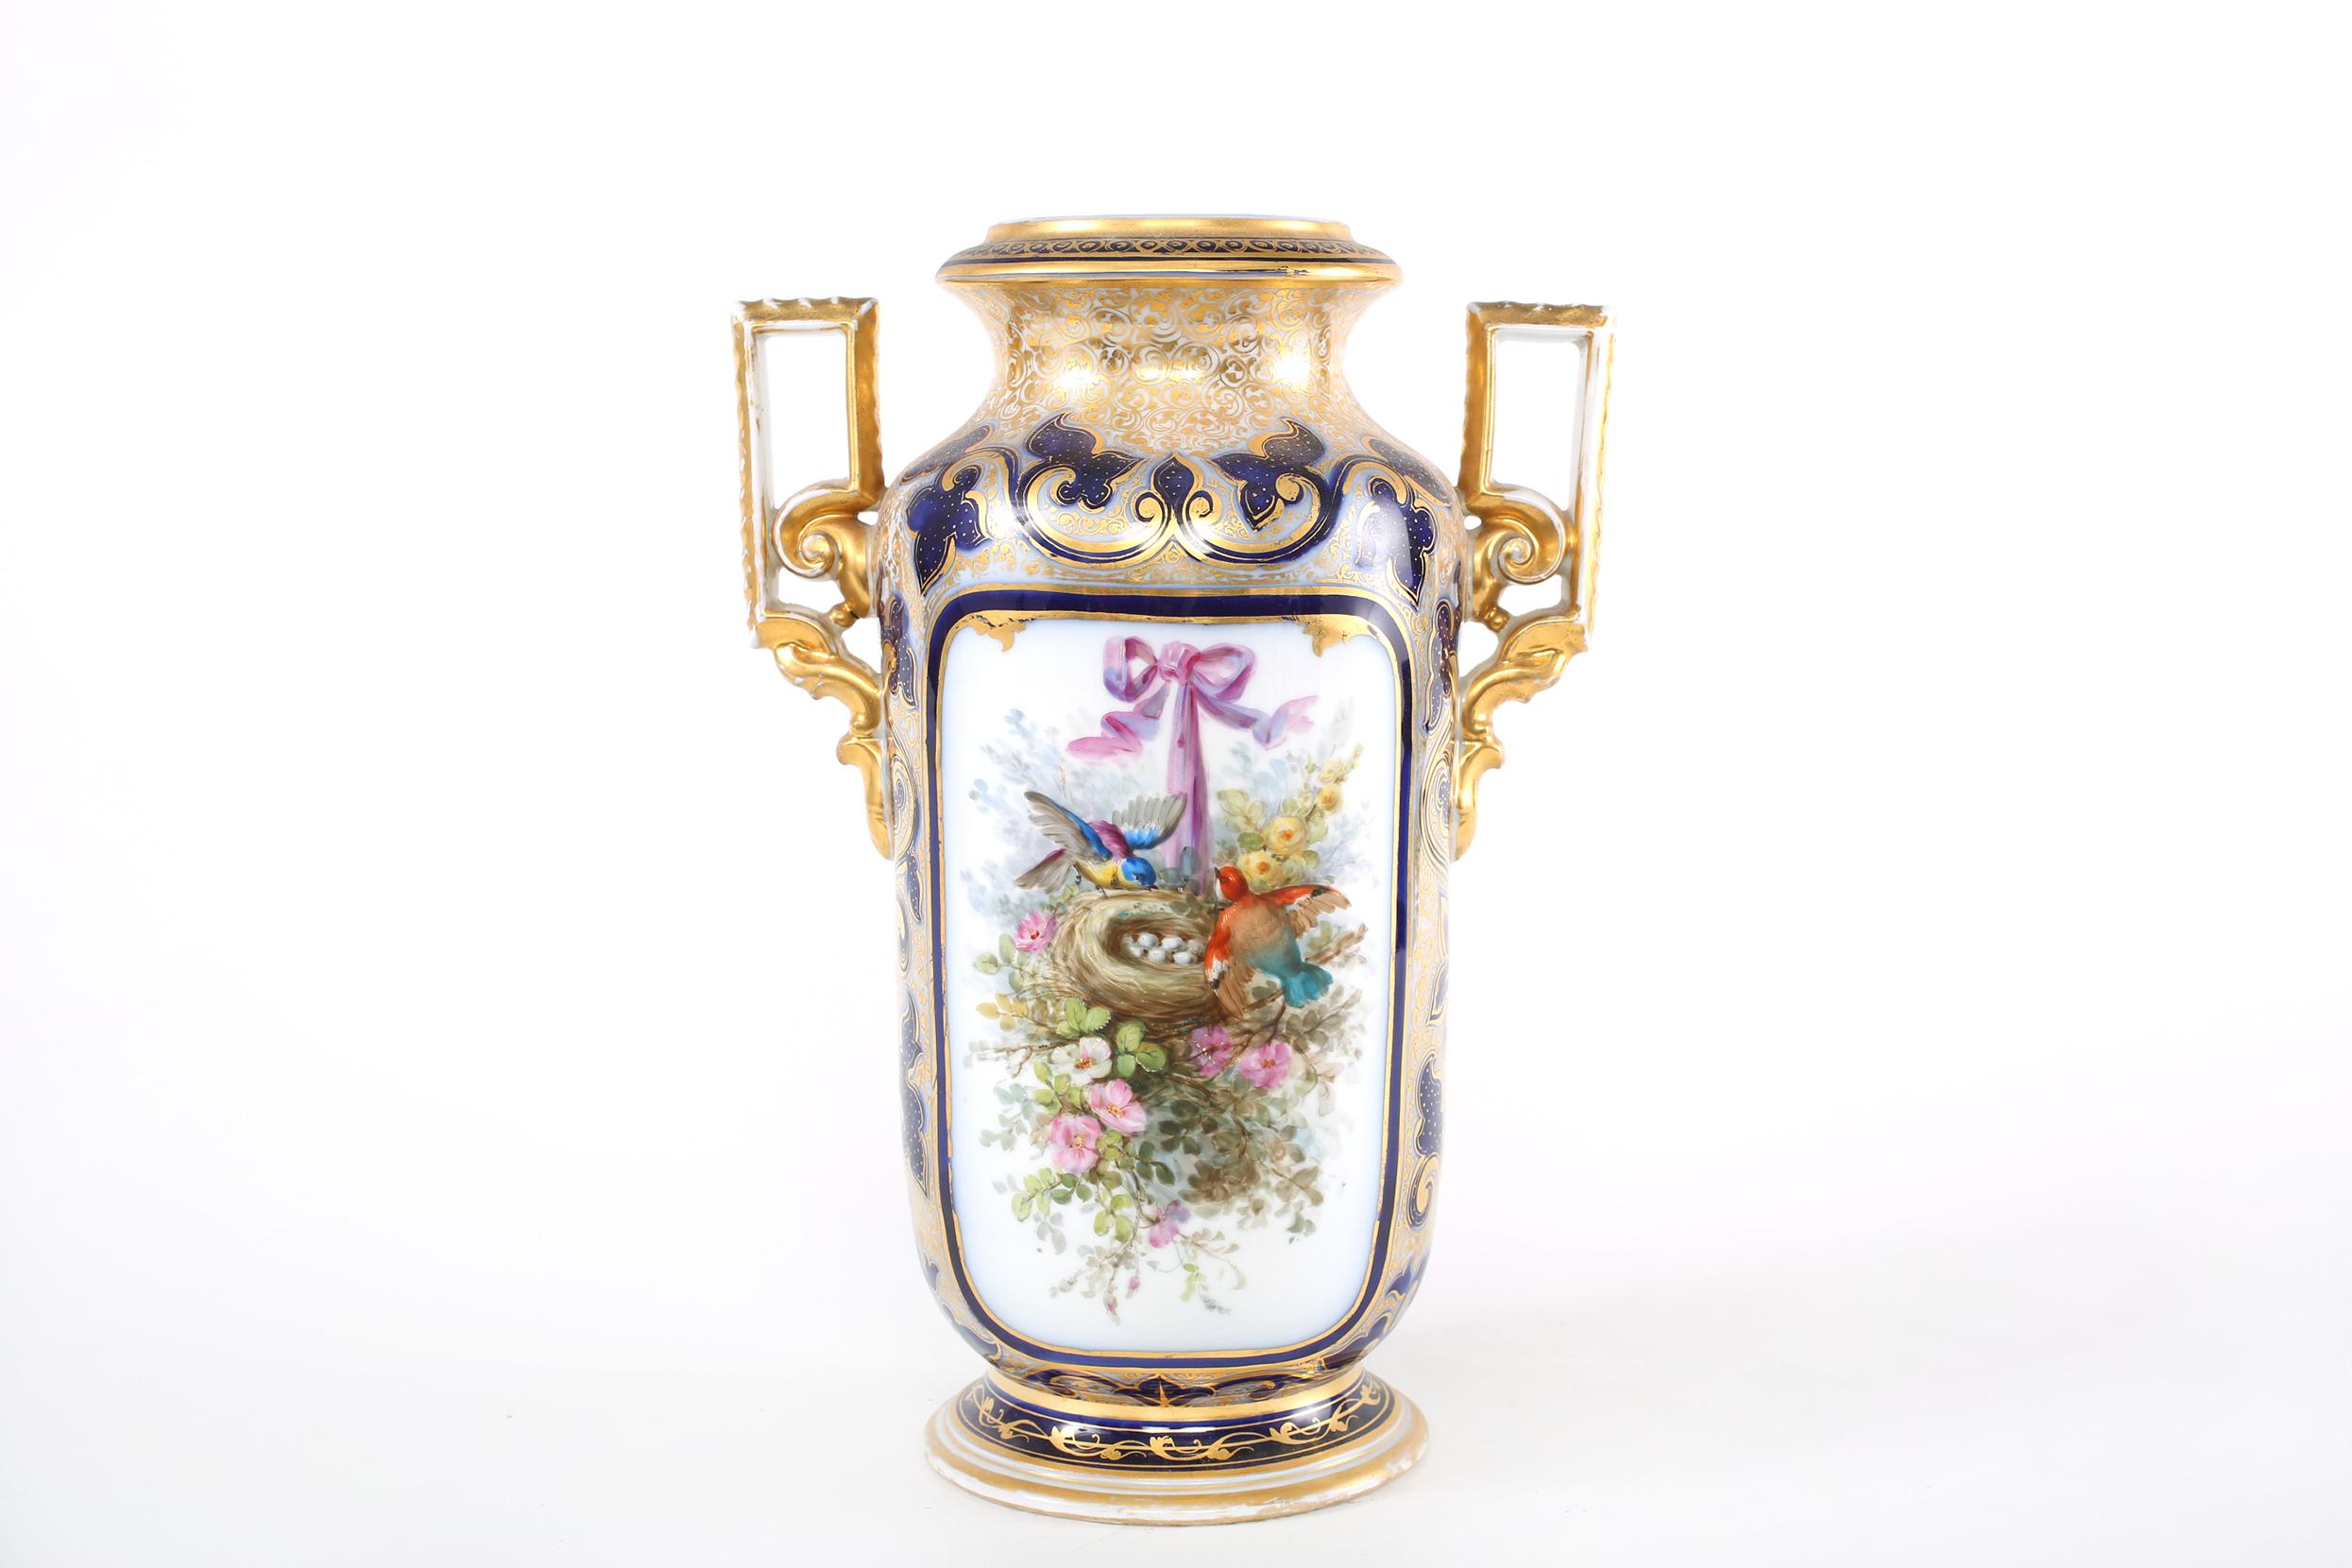 Mid 19th century French porcelain decorative vase / piece with exterior gilt gold painted scene design details and side handles. The vase / piece is in good condition with appropriate wear consistent with age / use. The vase / piece stands about 17